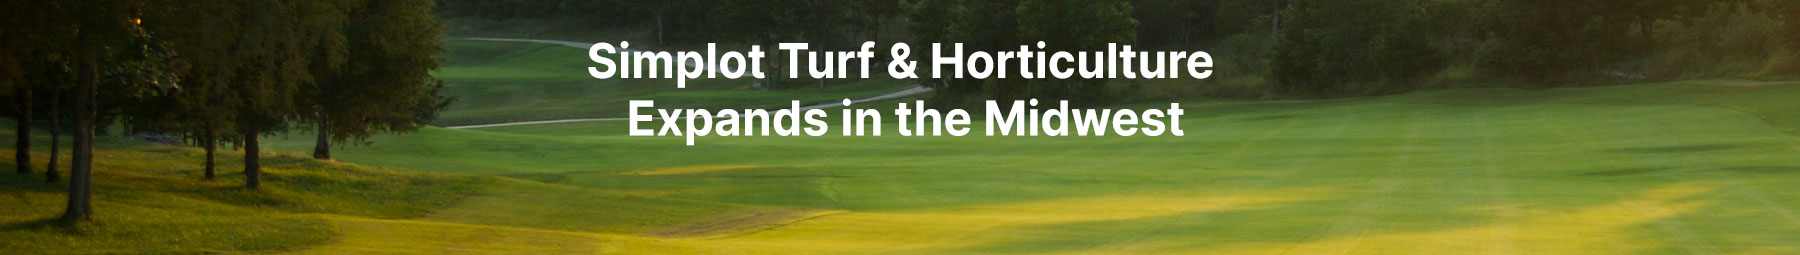 Simplot Turf & Horticulture Expands in the Midwest